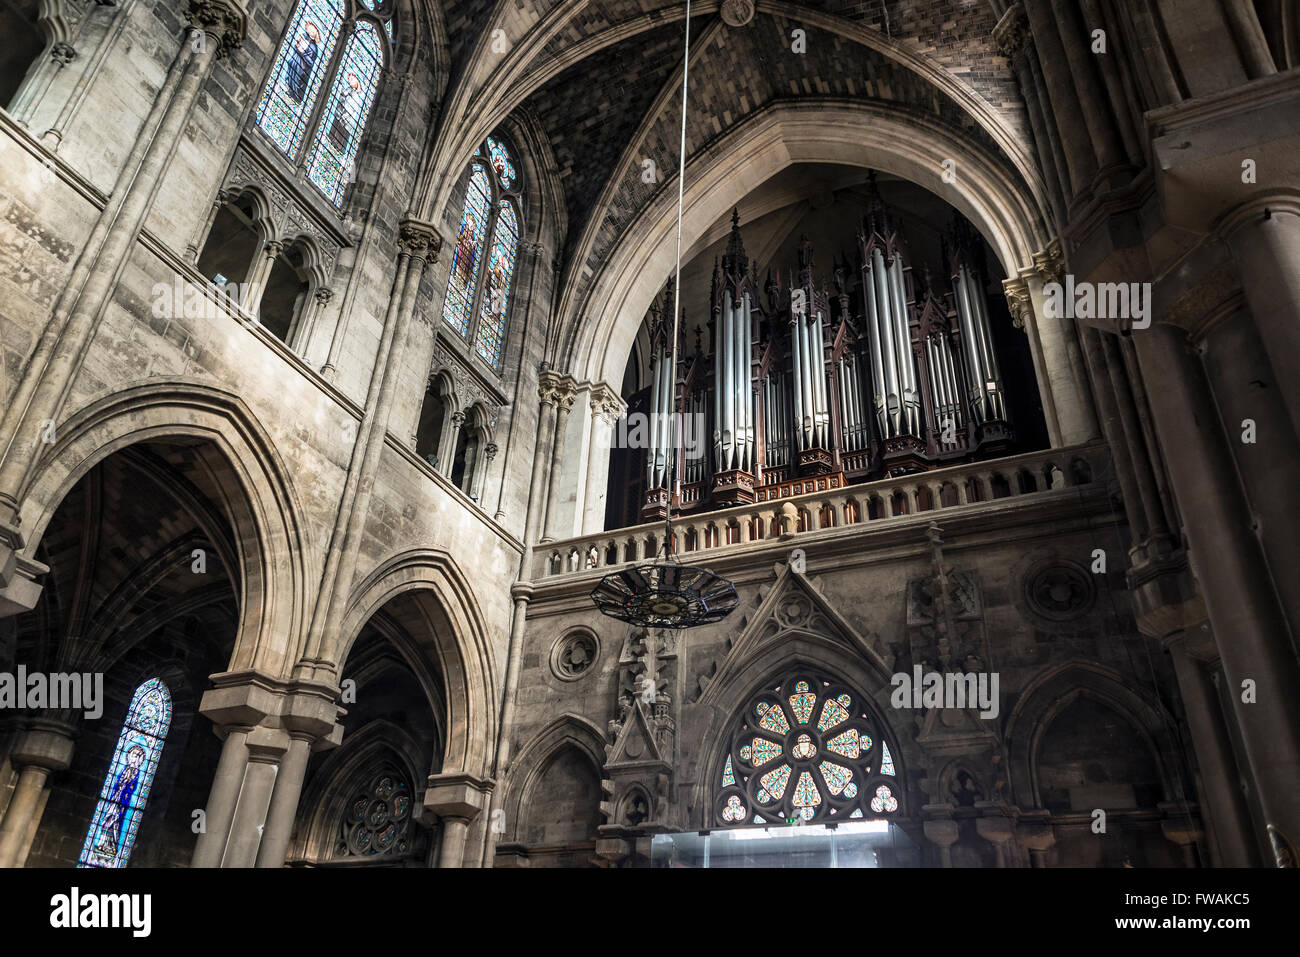 The pipe organ in nave of St Louis des Chartrons church. Bordeaux, Aquitaine, France. Stock Photo